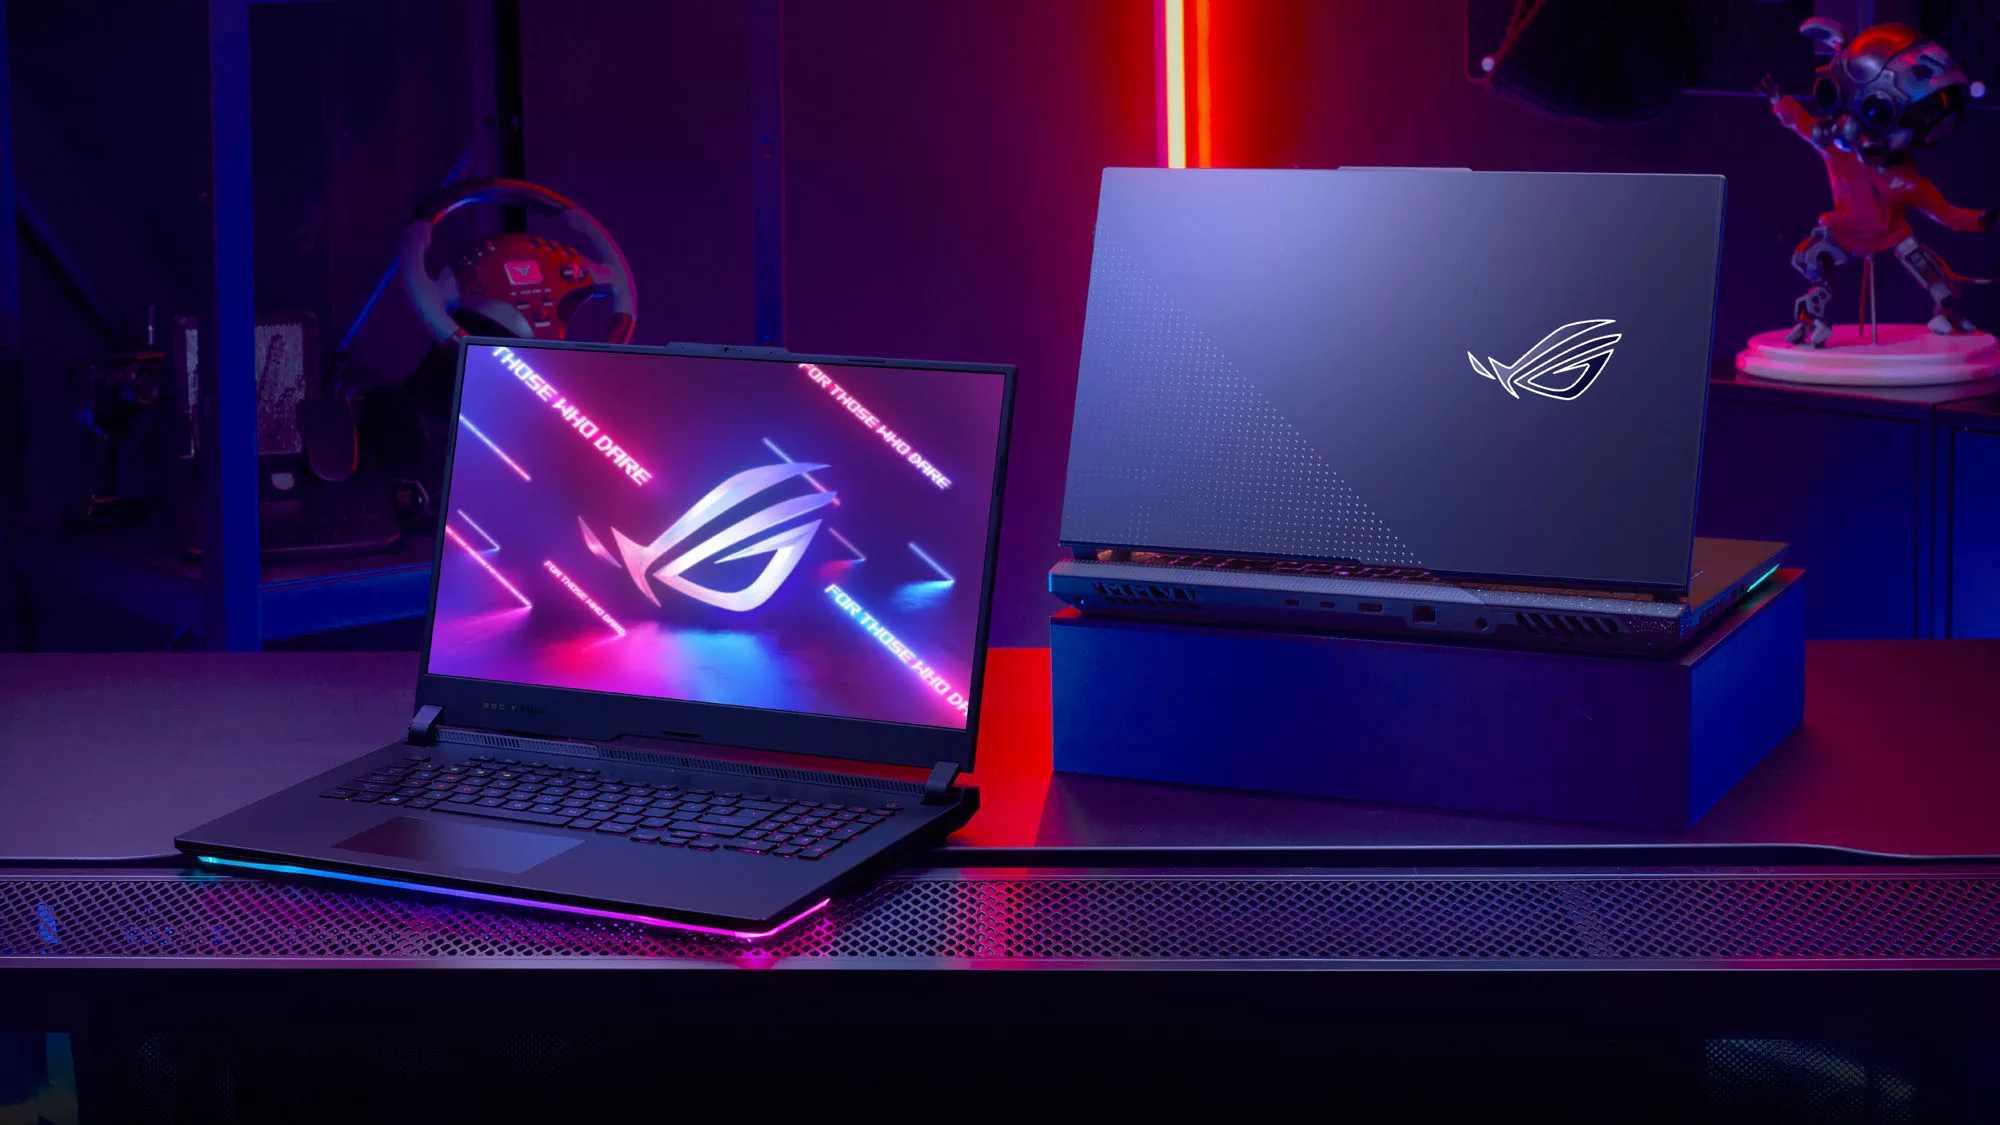 The ROG Strix SCAR 17 and Strix G17 facing opposite directions on a table.